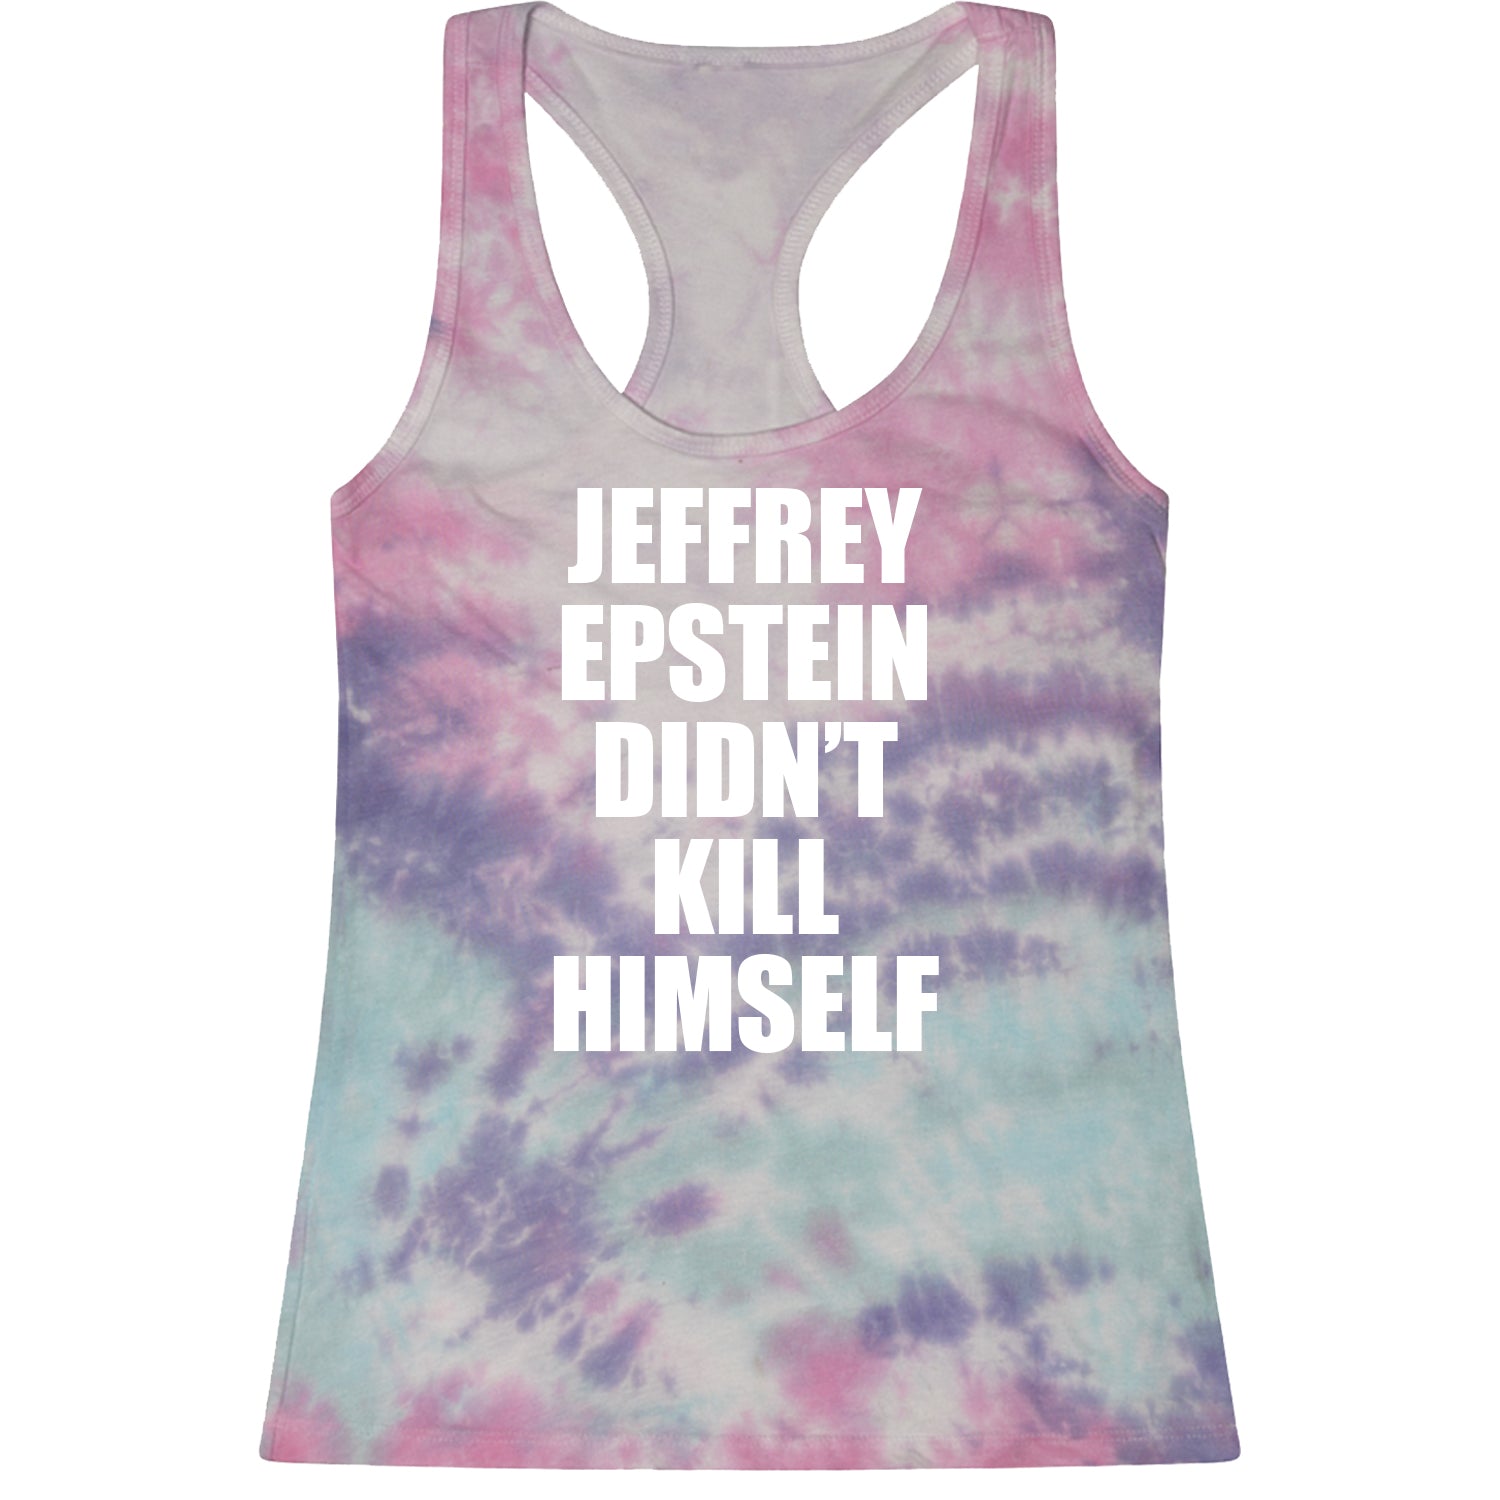 Jeffrey Epstein Didn't Kill Himself Racerback Tank Top for Women coverup, homicide, murder, ssadgk, trump by Expression Tees